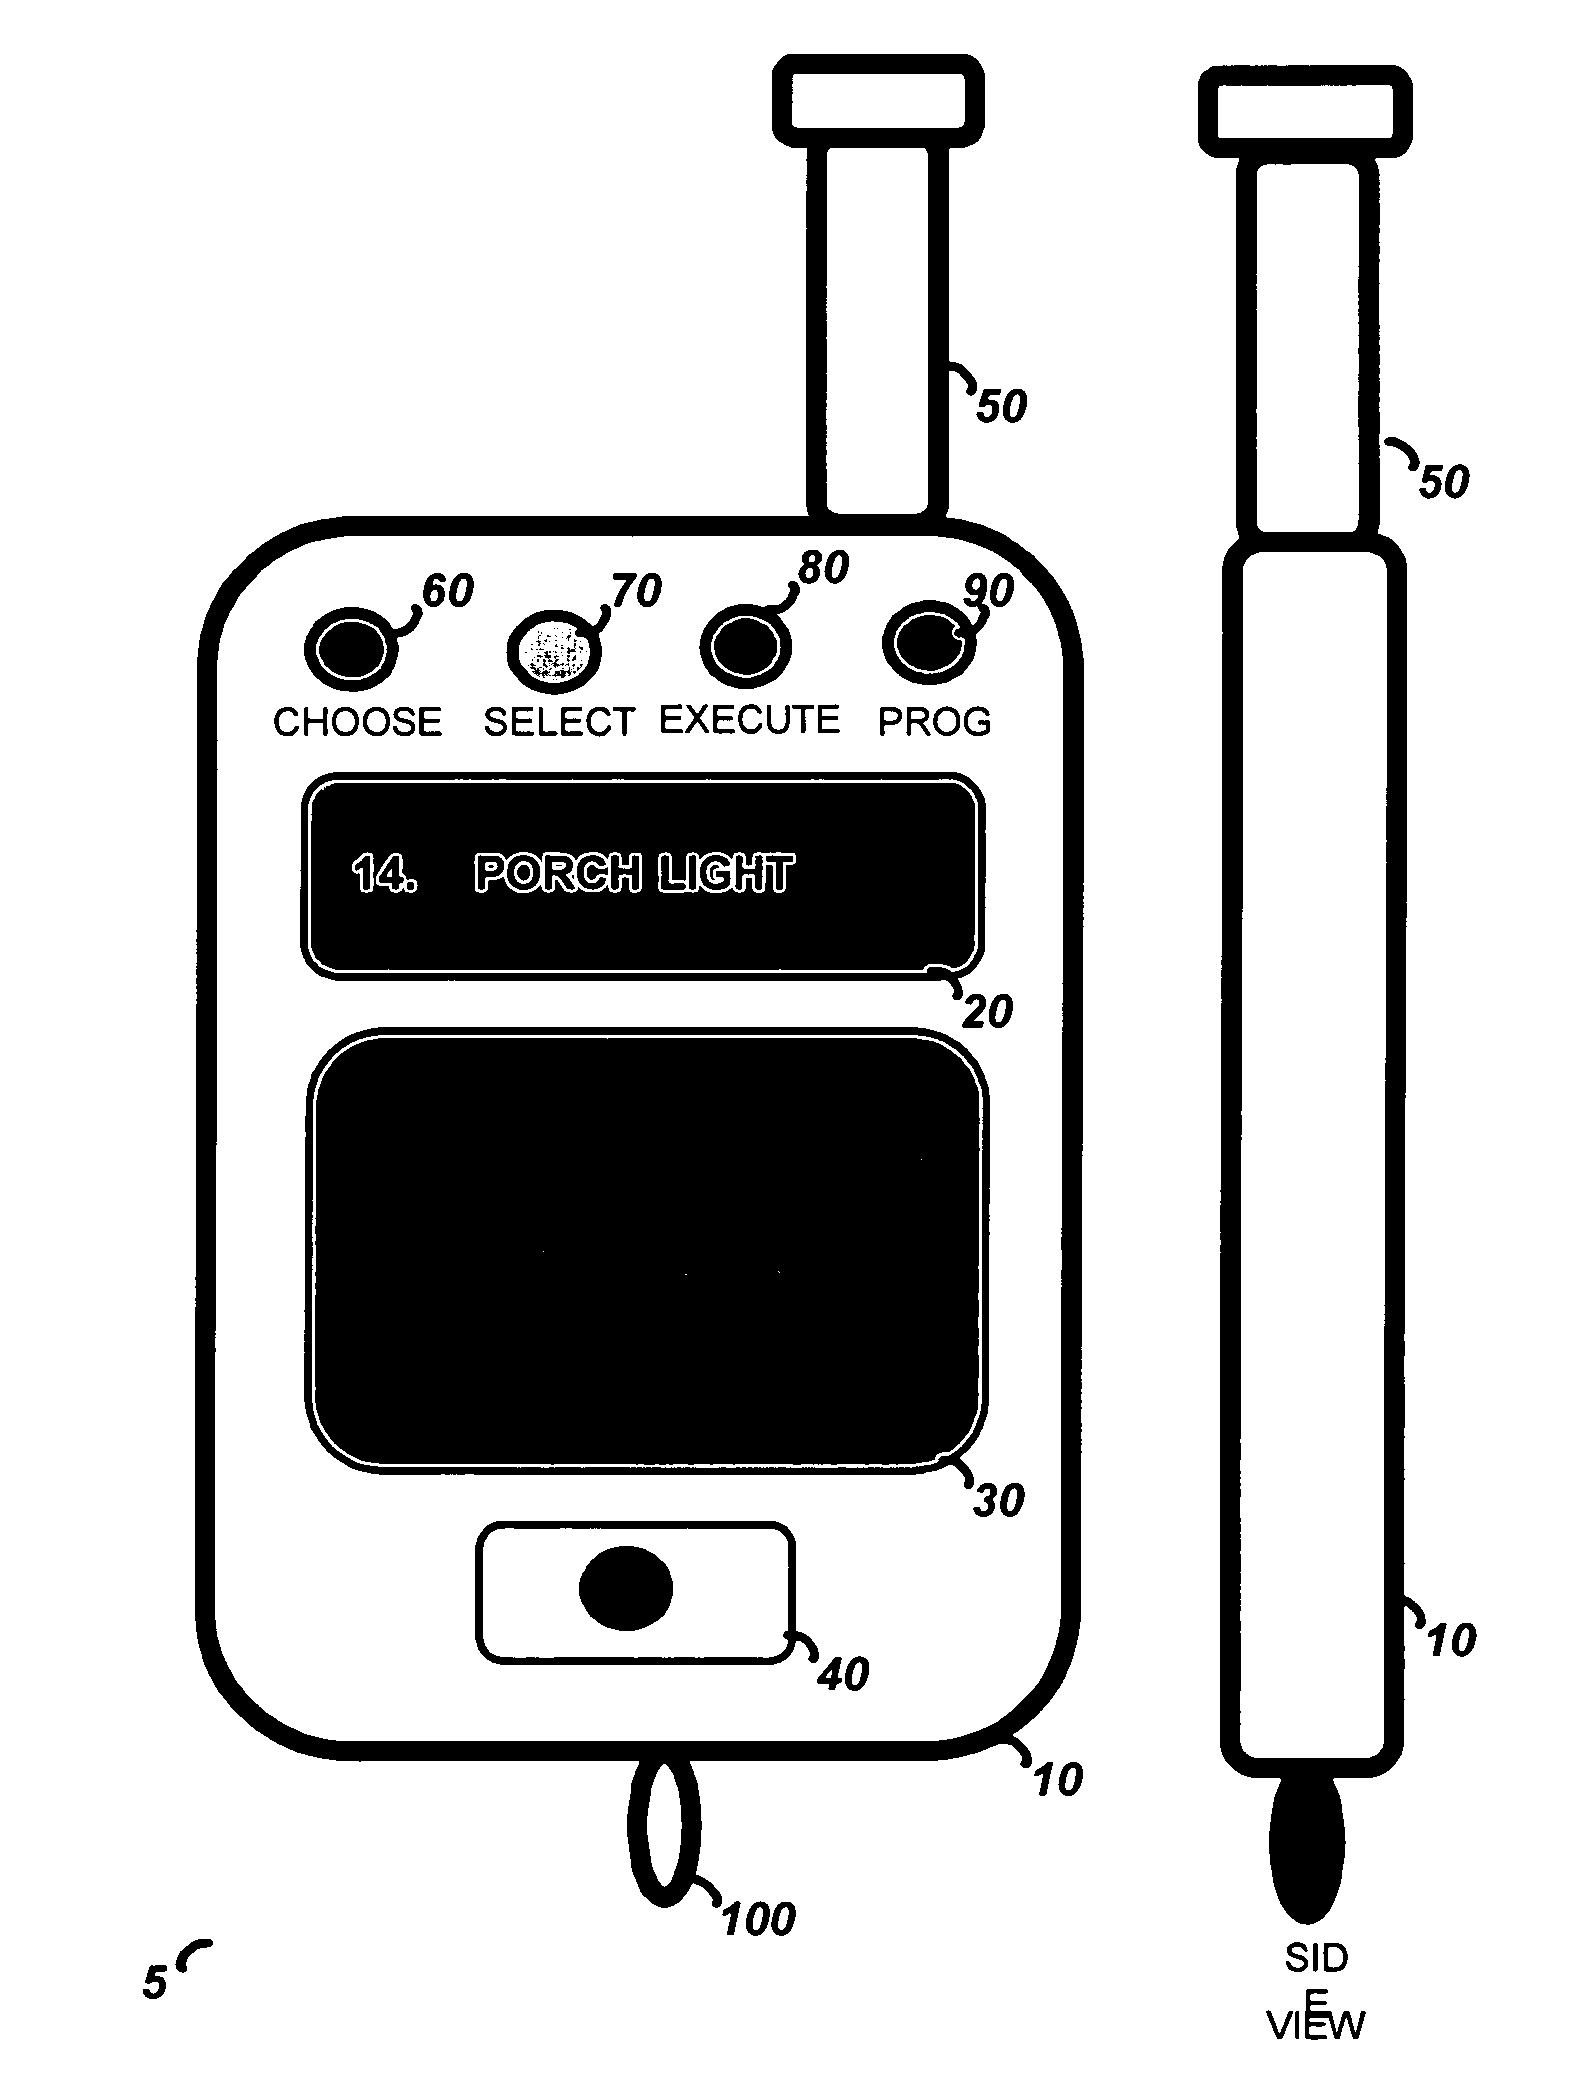 Touchscreen device for controlling a security system